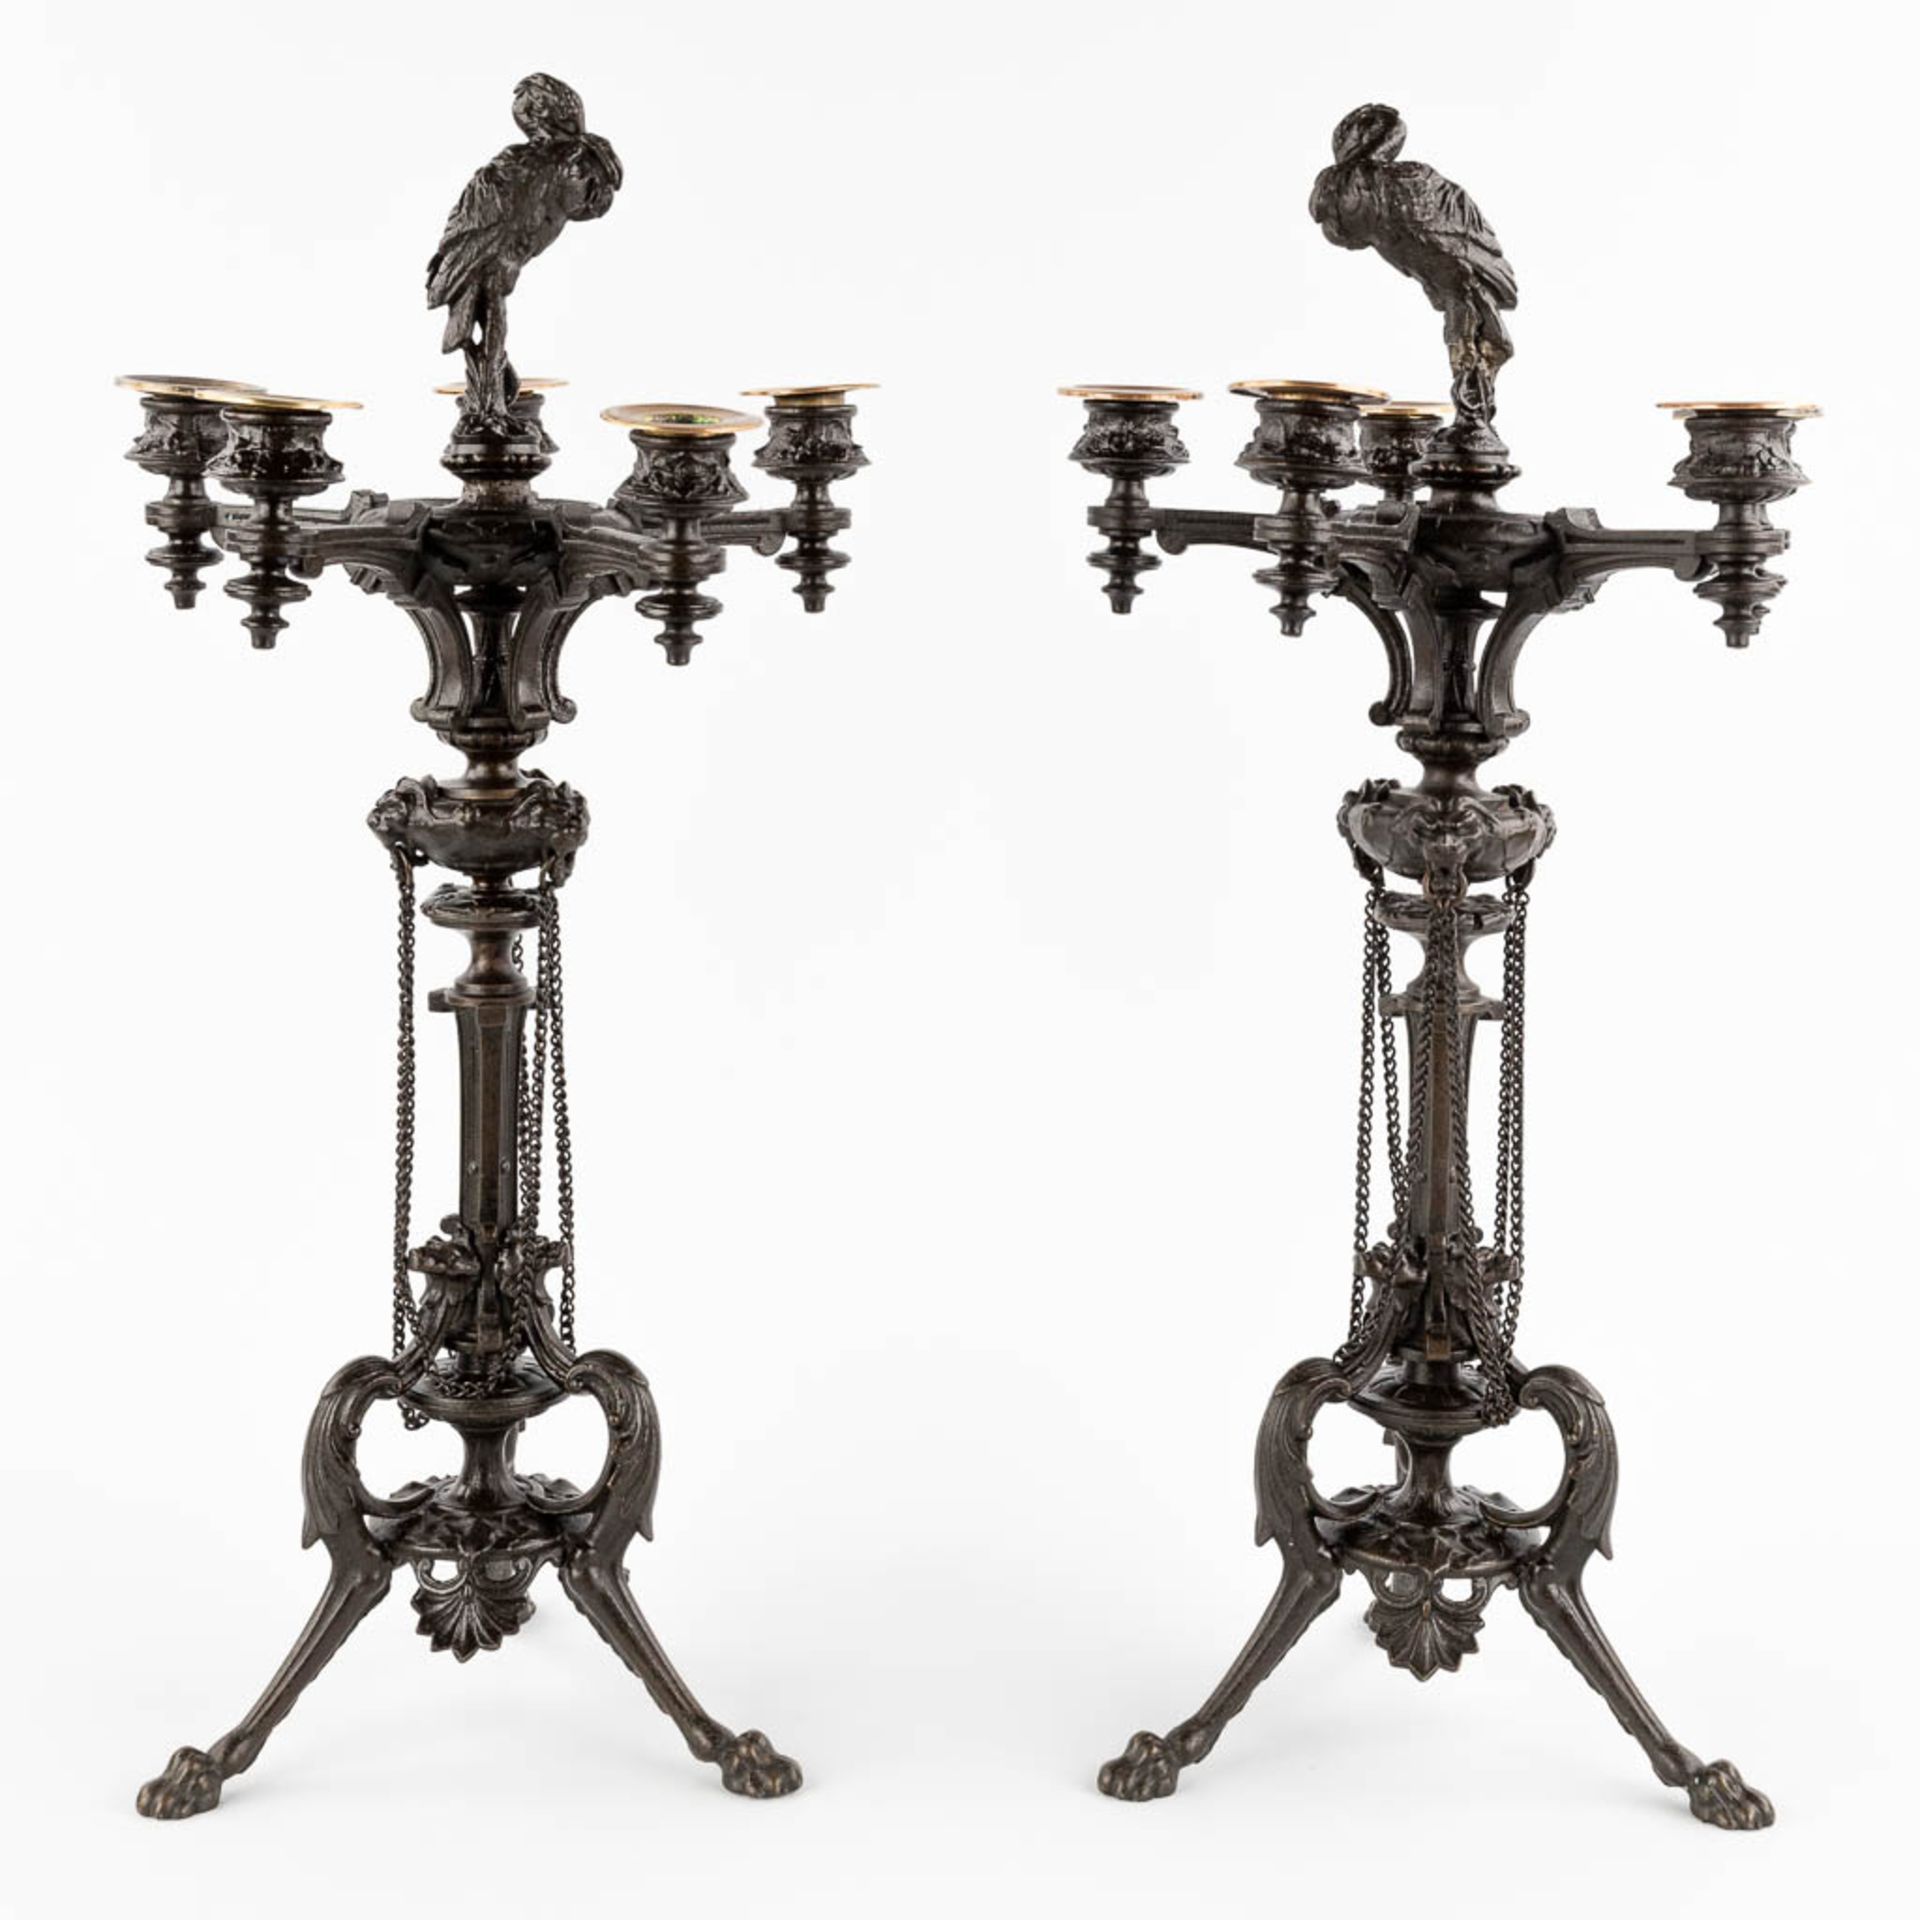 A pair of candelabra, bronze decorated with birds. 19th C. (H:56 x D:26 cm)